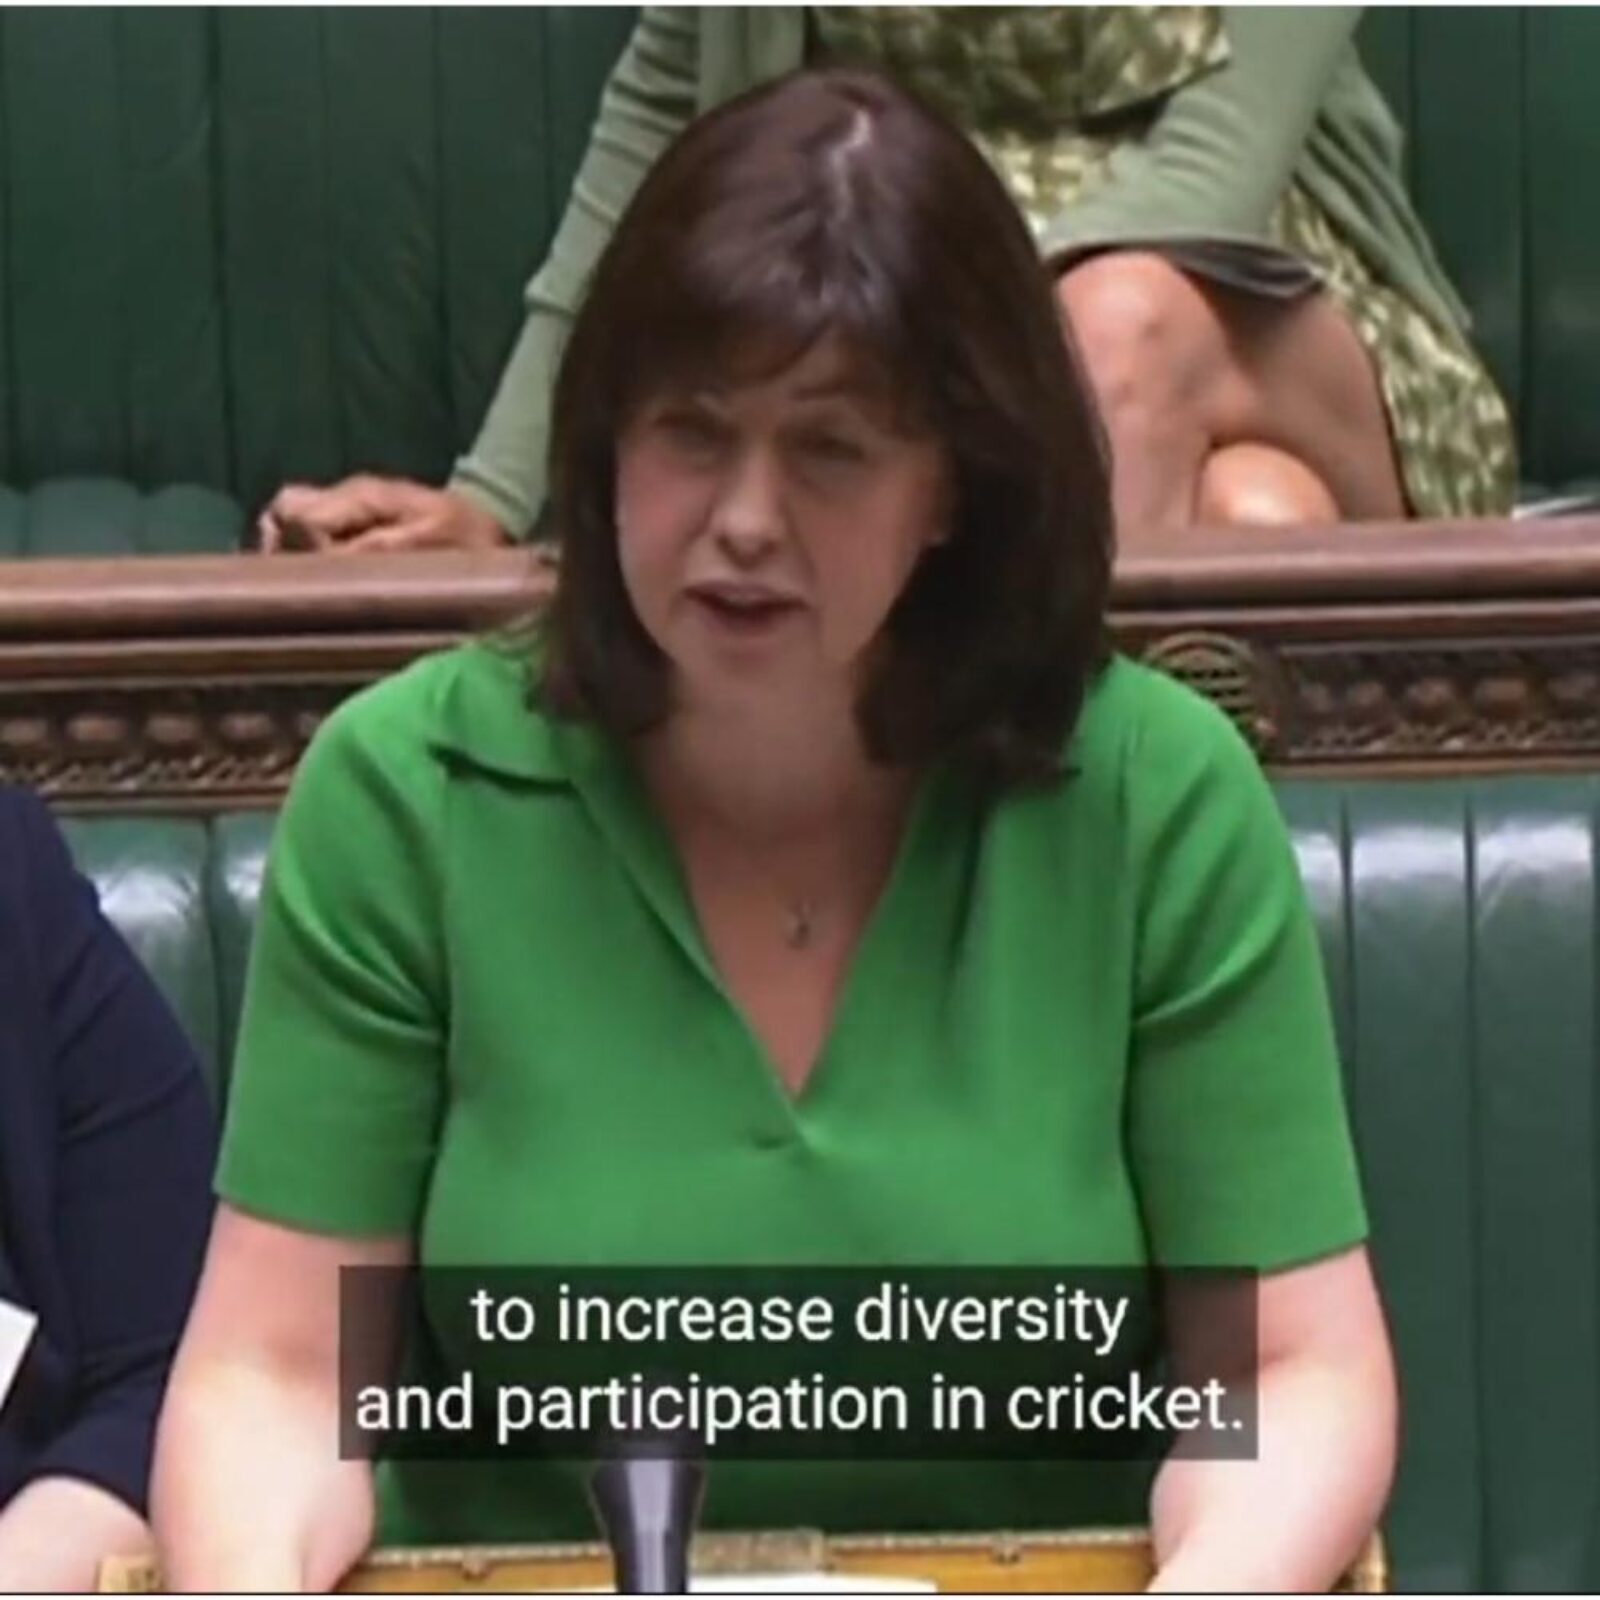 Lucy Powell in Parliament raising concerns about discrimination and prejudice in cricket and sports